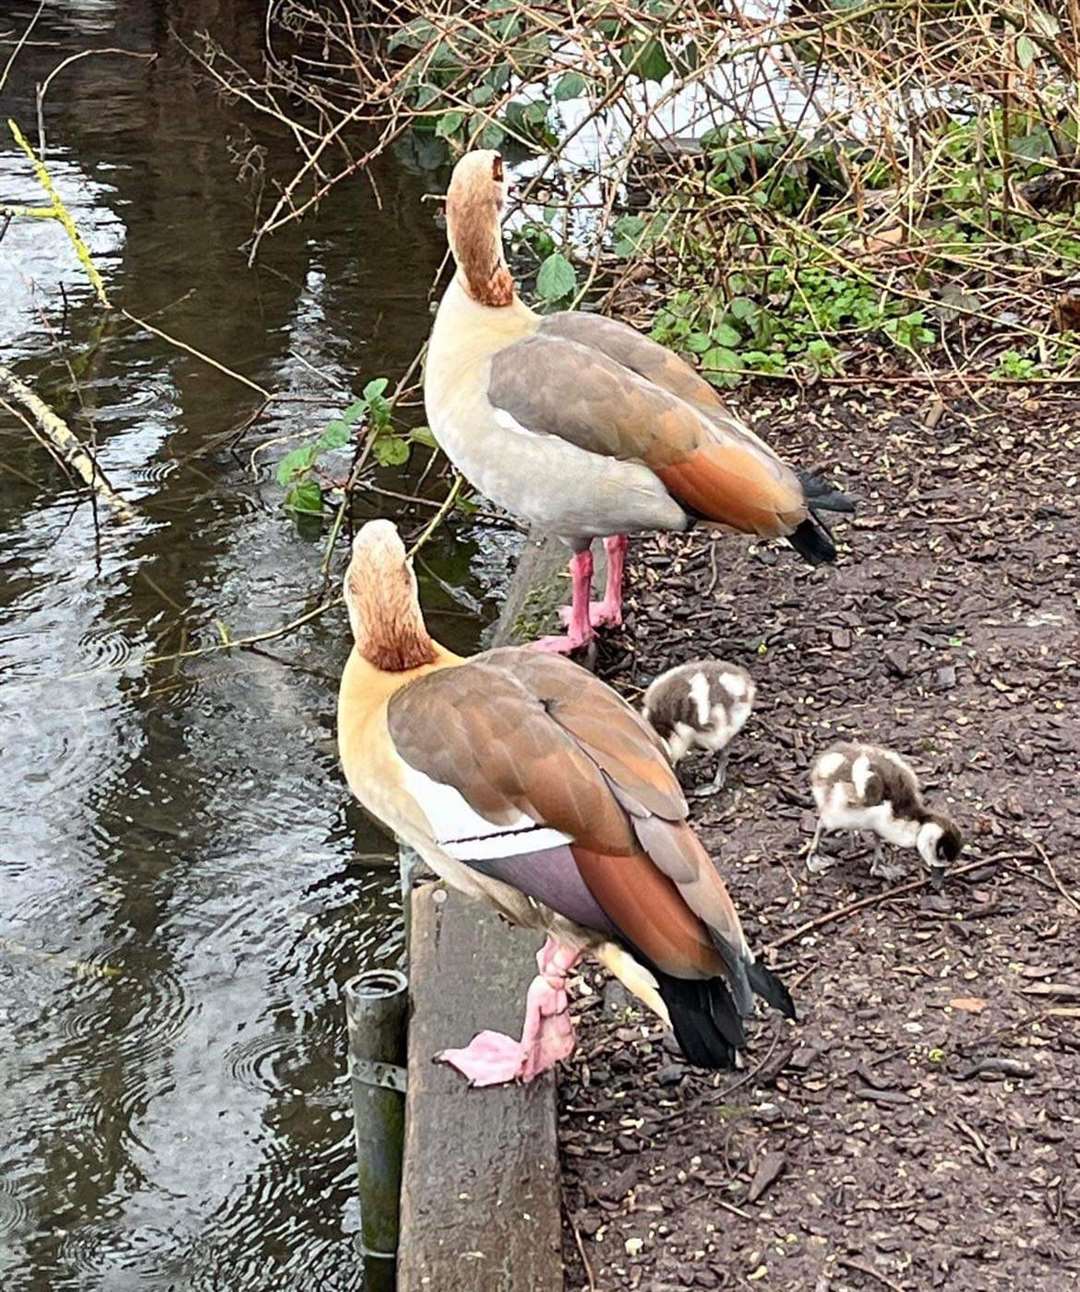 Elena the goose was helped by a team from Dartford Animal Rescue. Photo credit: Dartford Animal Rescue